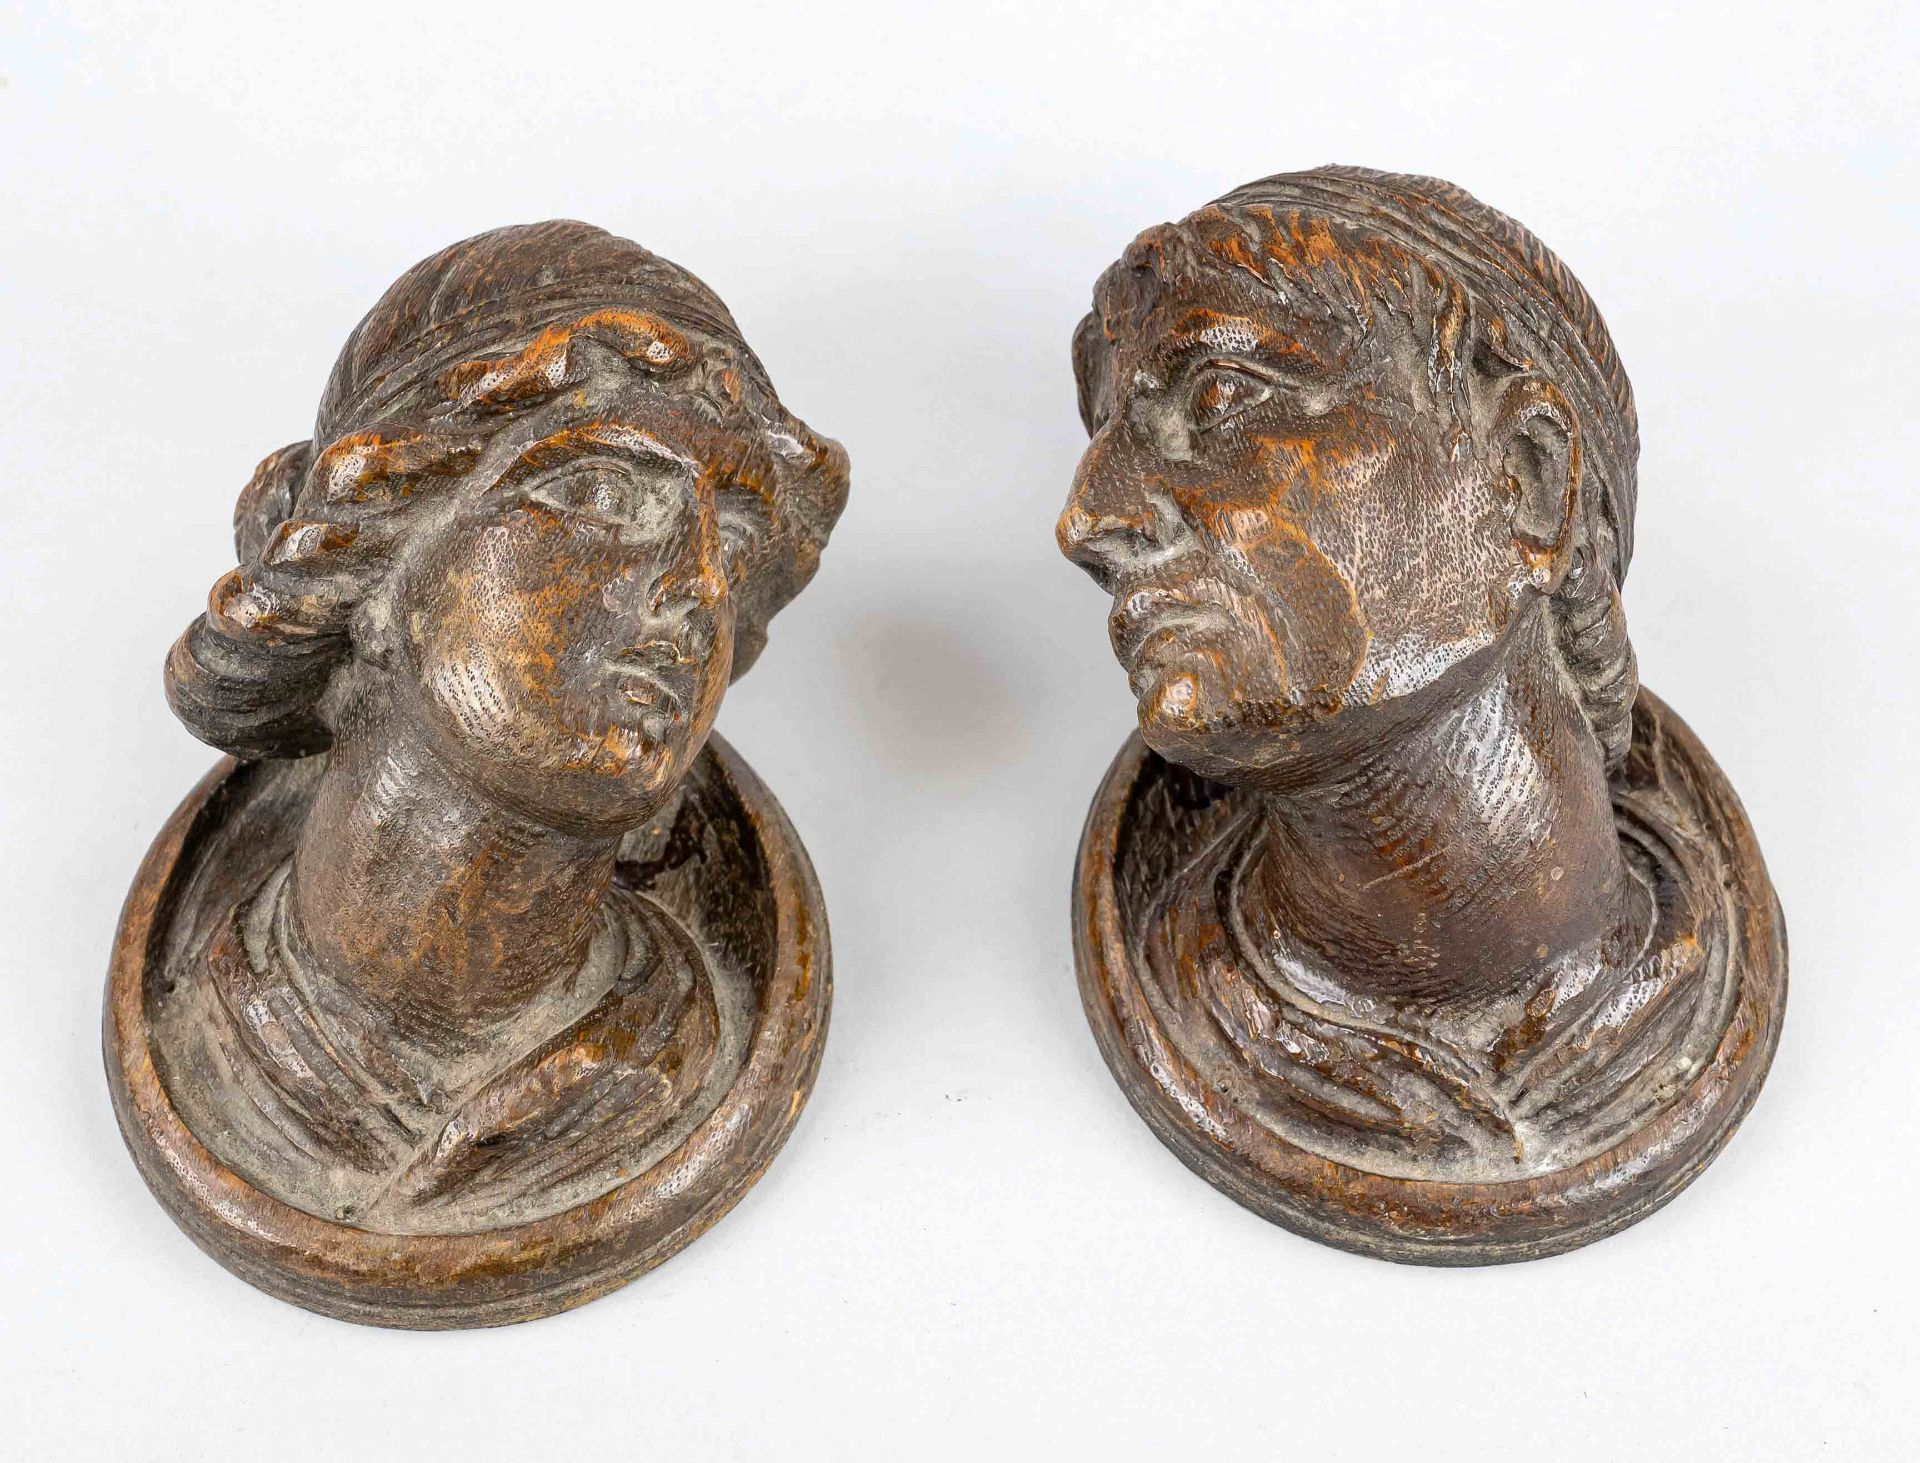 Wood sculptor c. 1880, pair of antique heads, both fully sculptured carved from oak wood for